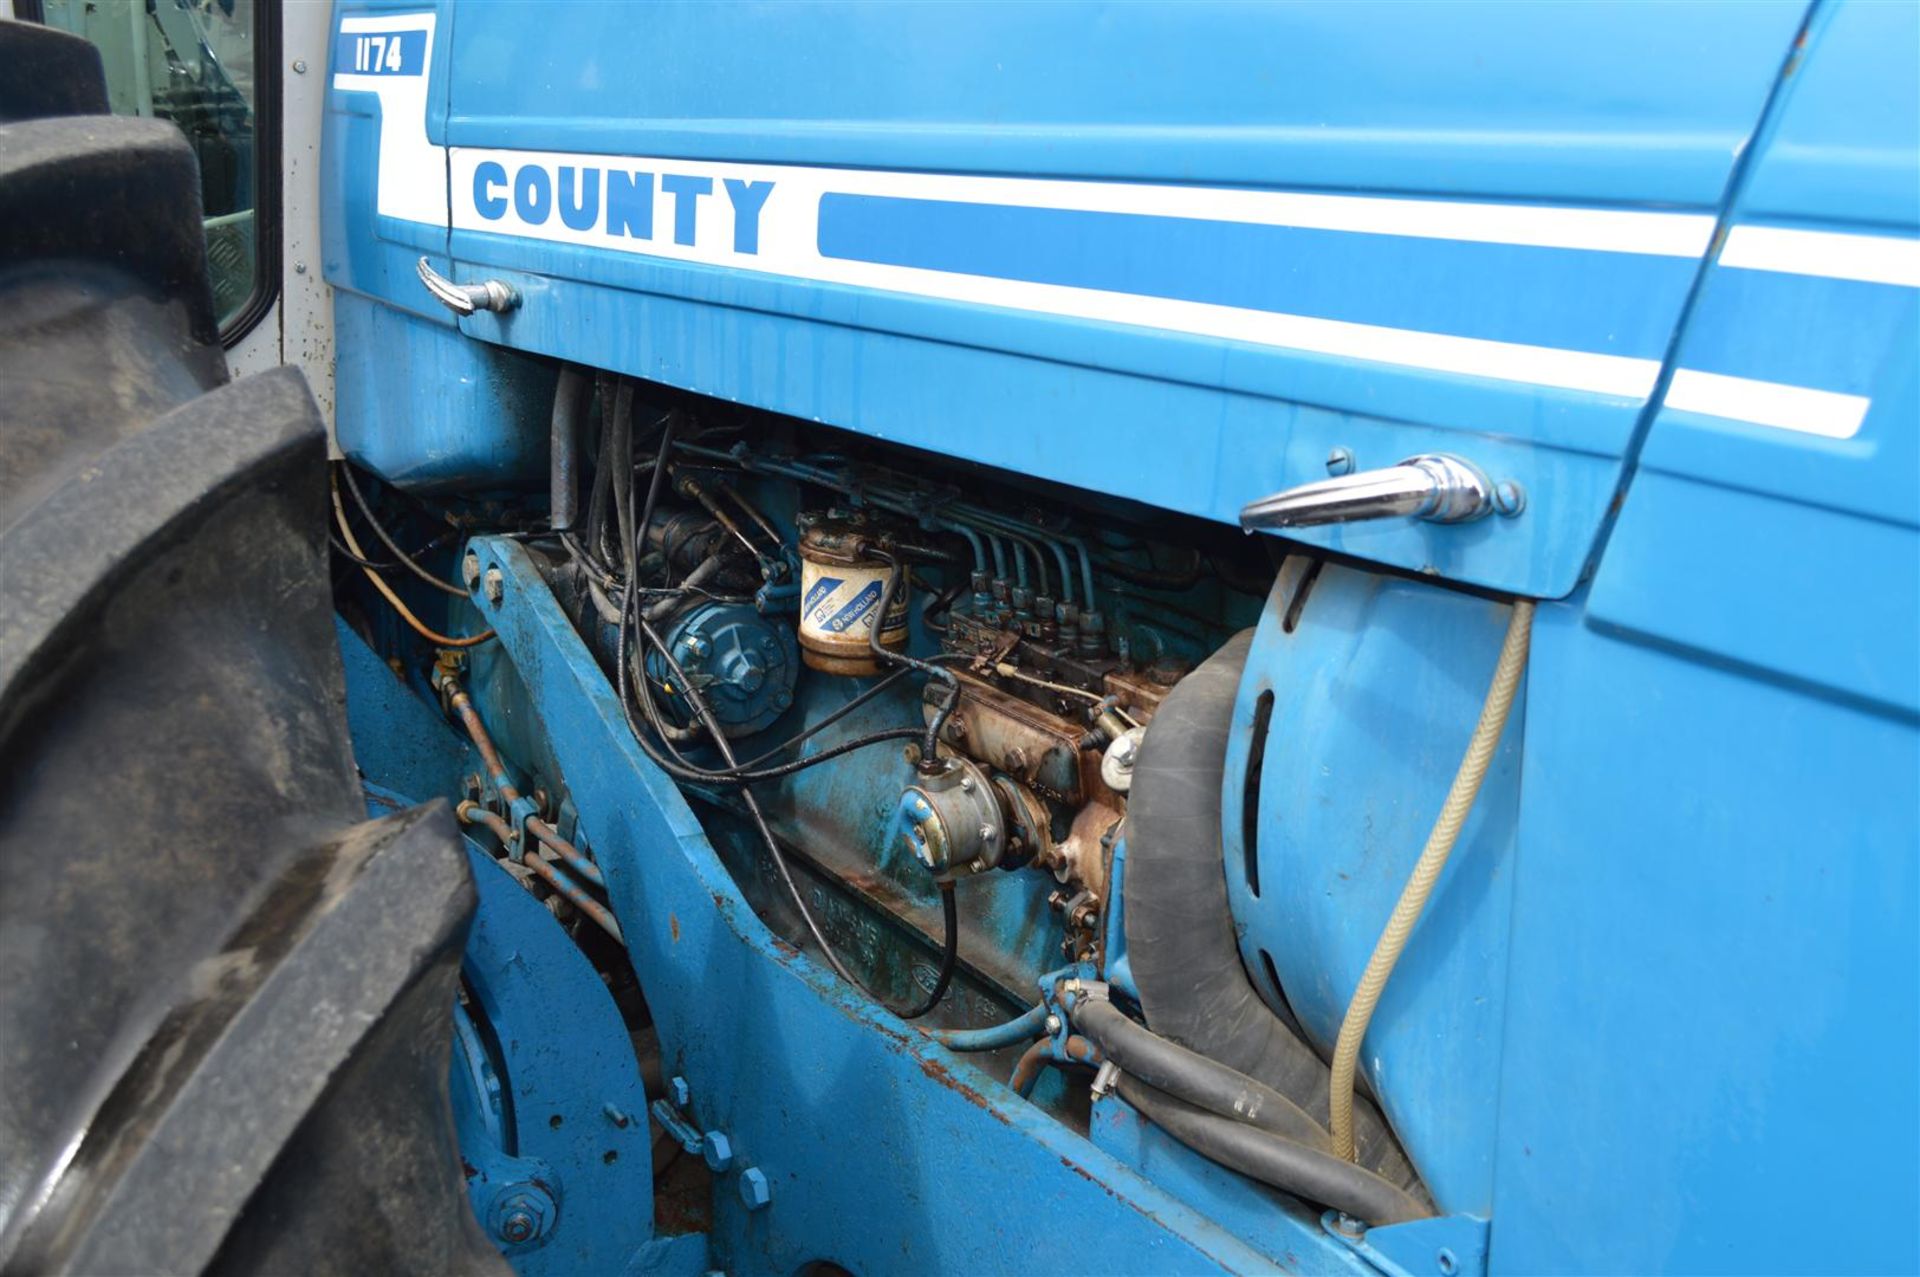 1979 COUNTY 1174 4wd 6 cylinder TRACTOR Reg No. 79MN145 Serial No. B95662 Production of the 1174 - Image 6 of 10